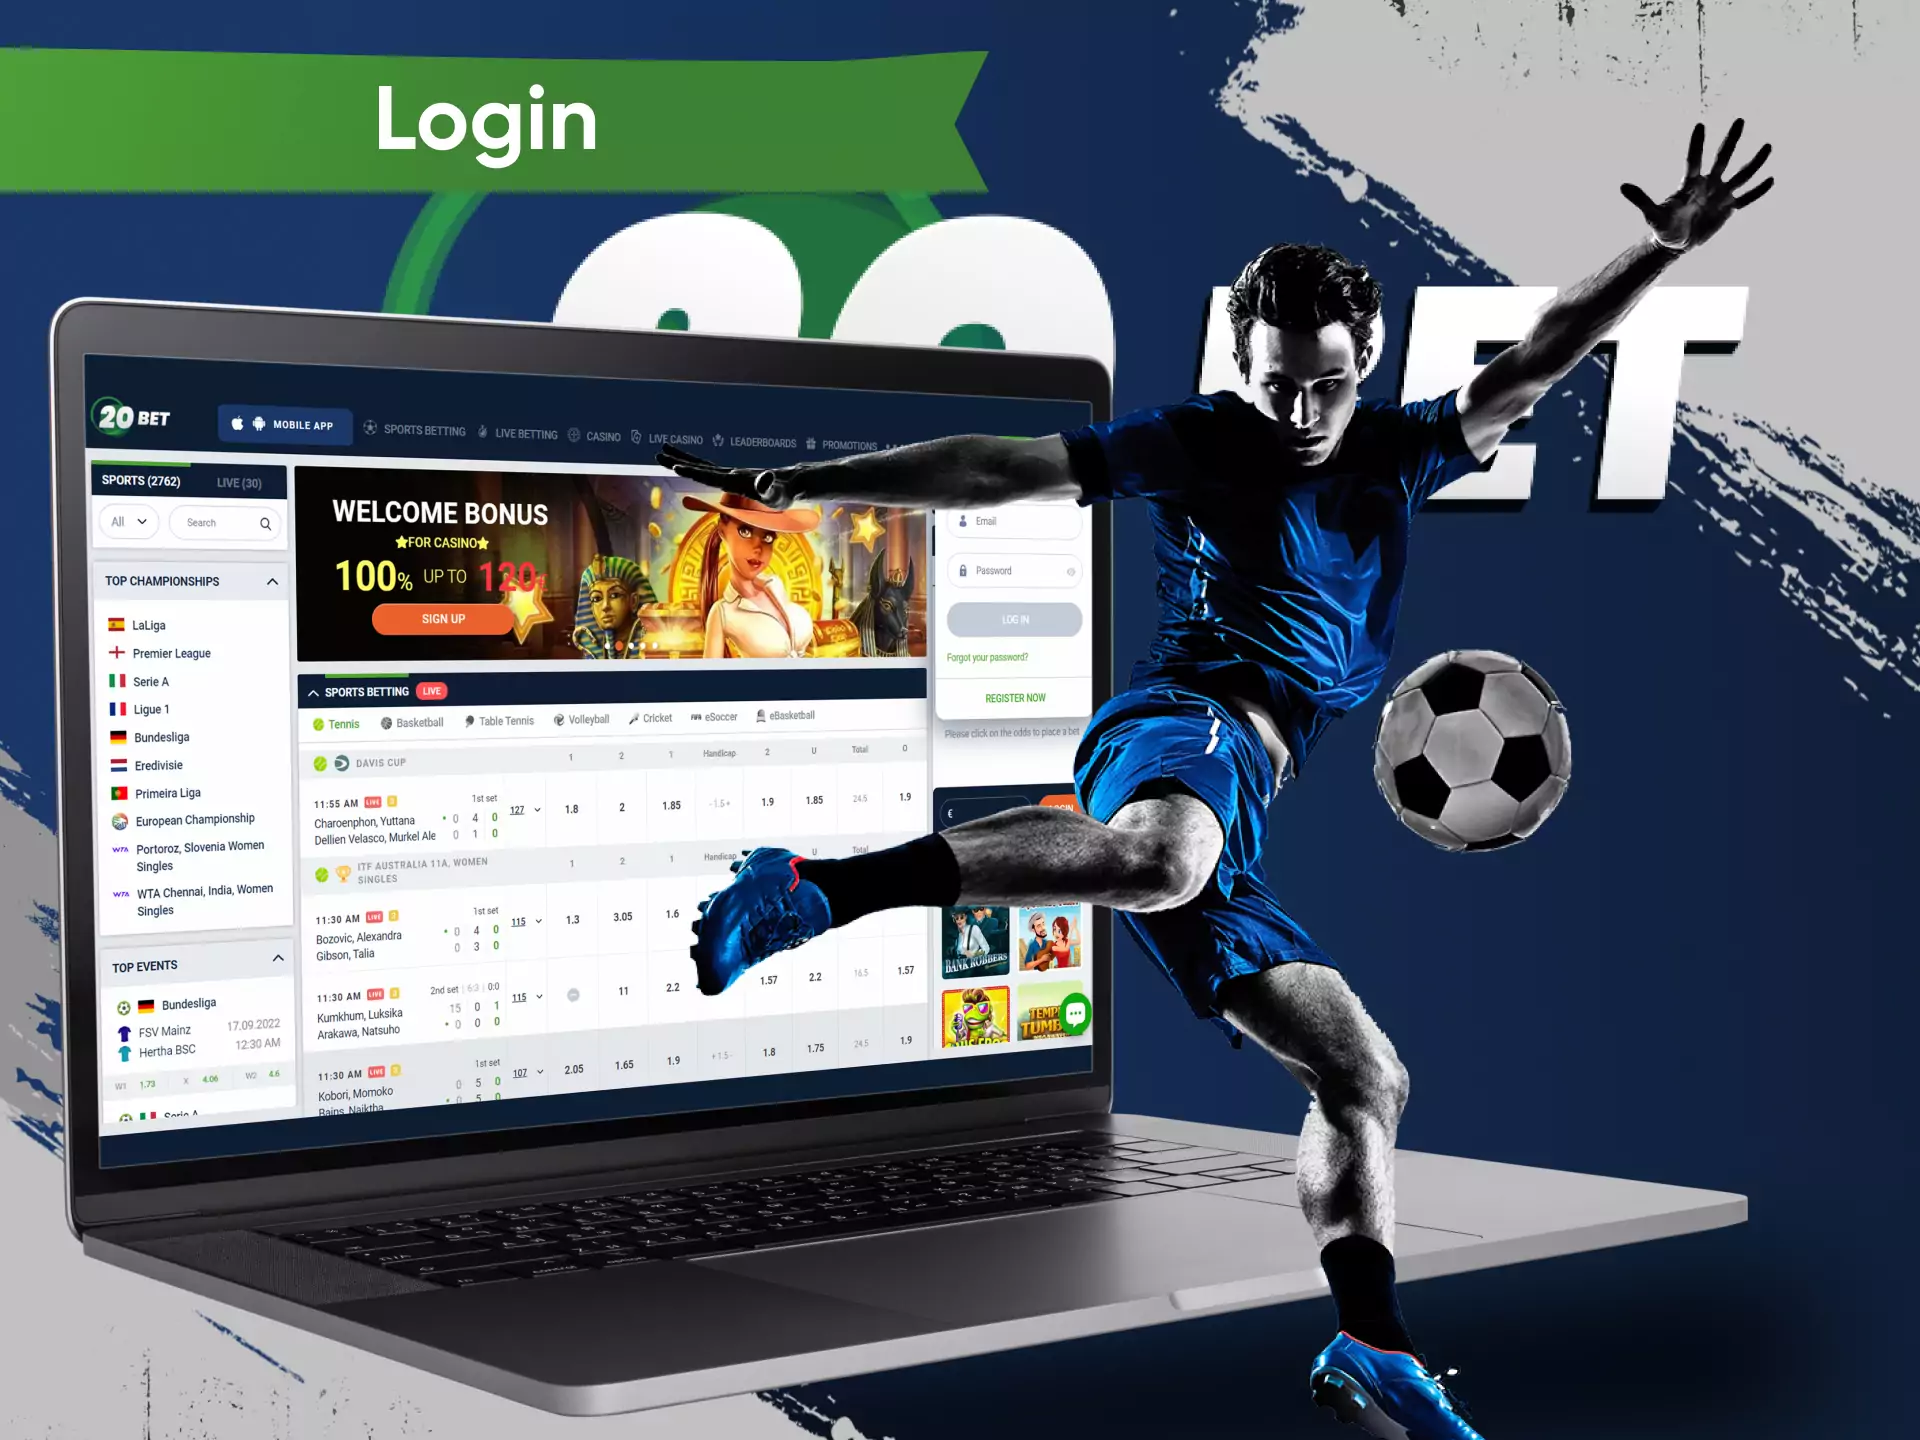 To start betting on 20bet, you need to log in.